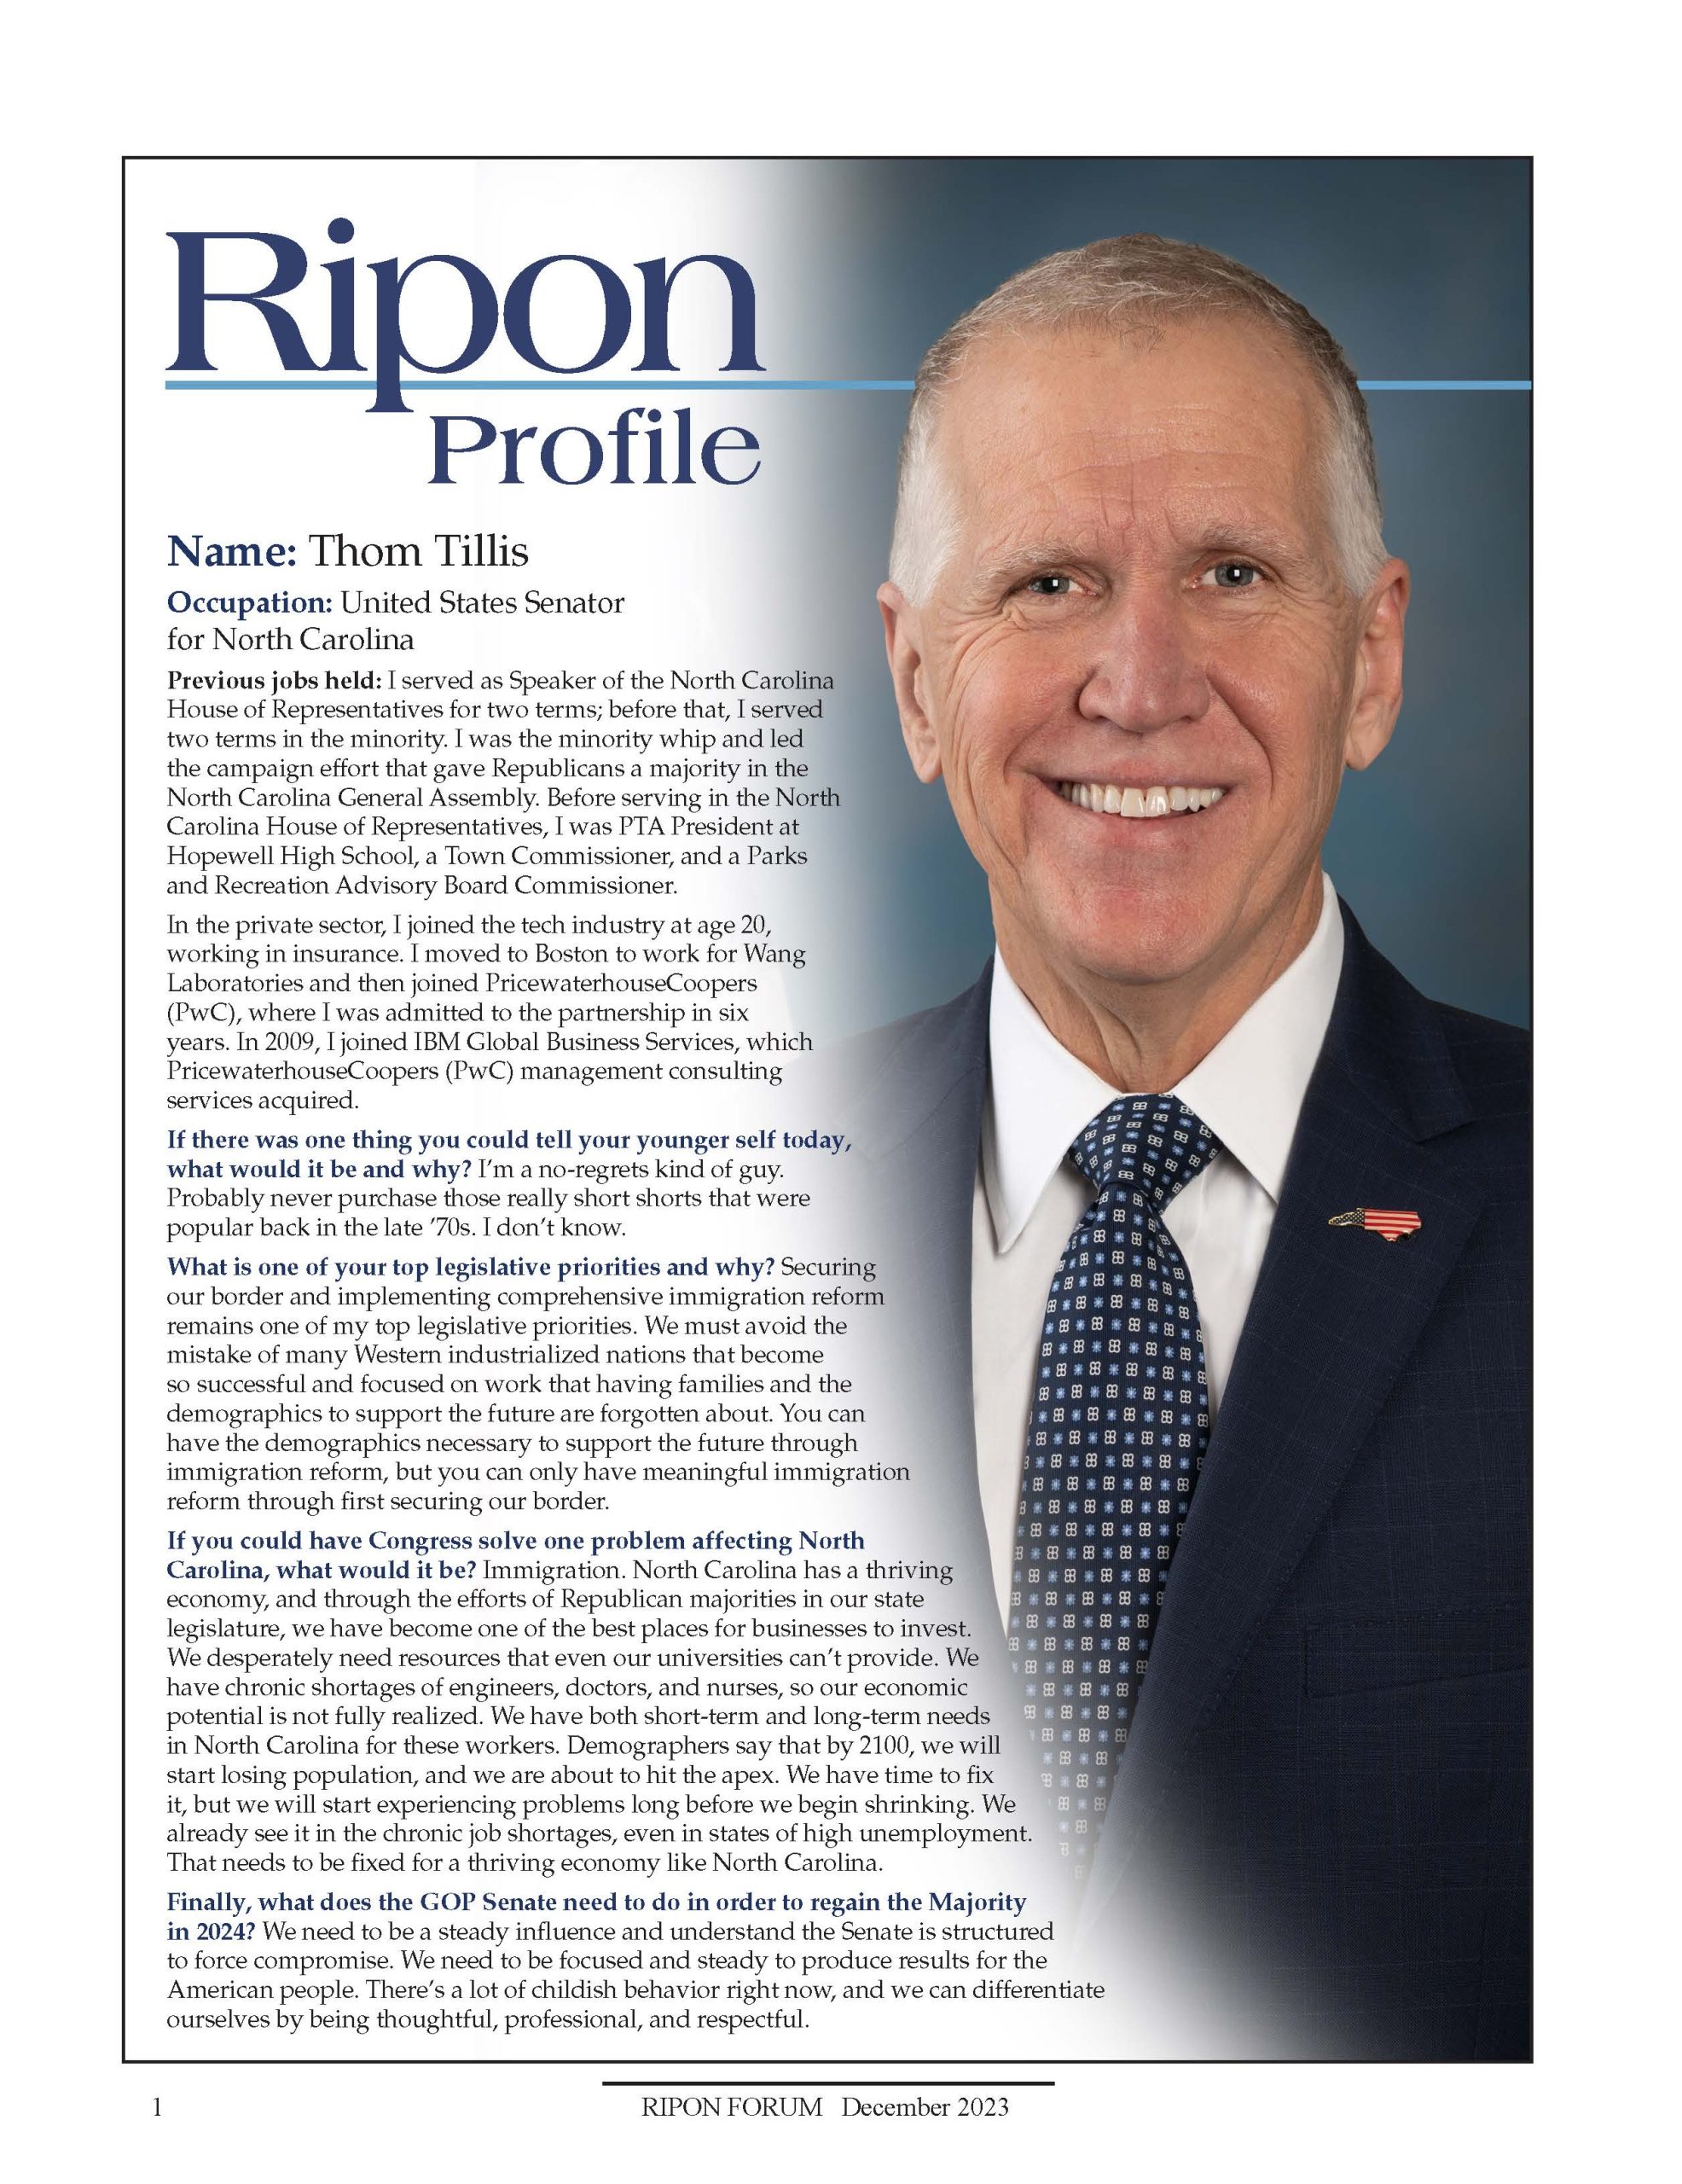 Candidates to Watch in 2024 - The Ripon Society : The Ripon Society